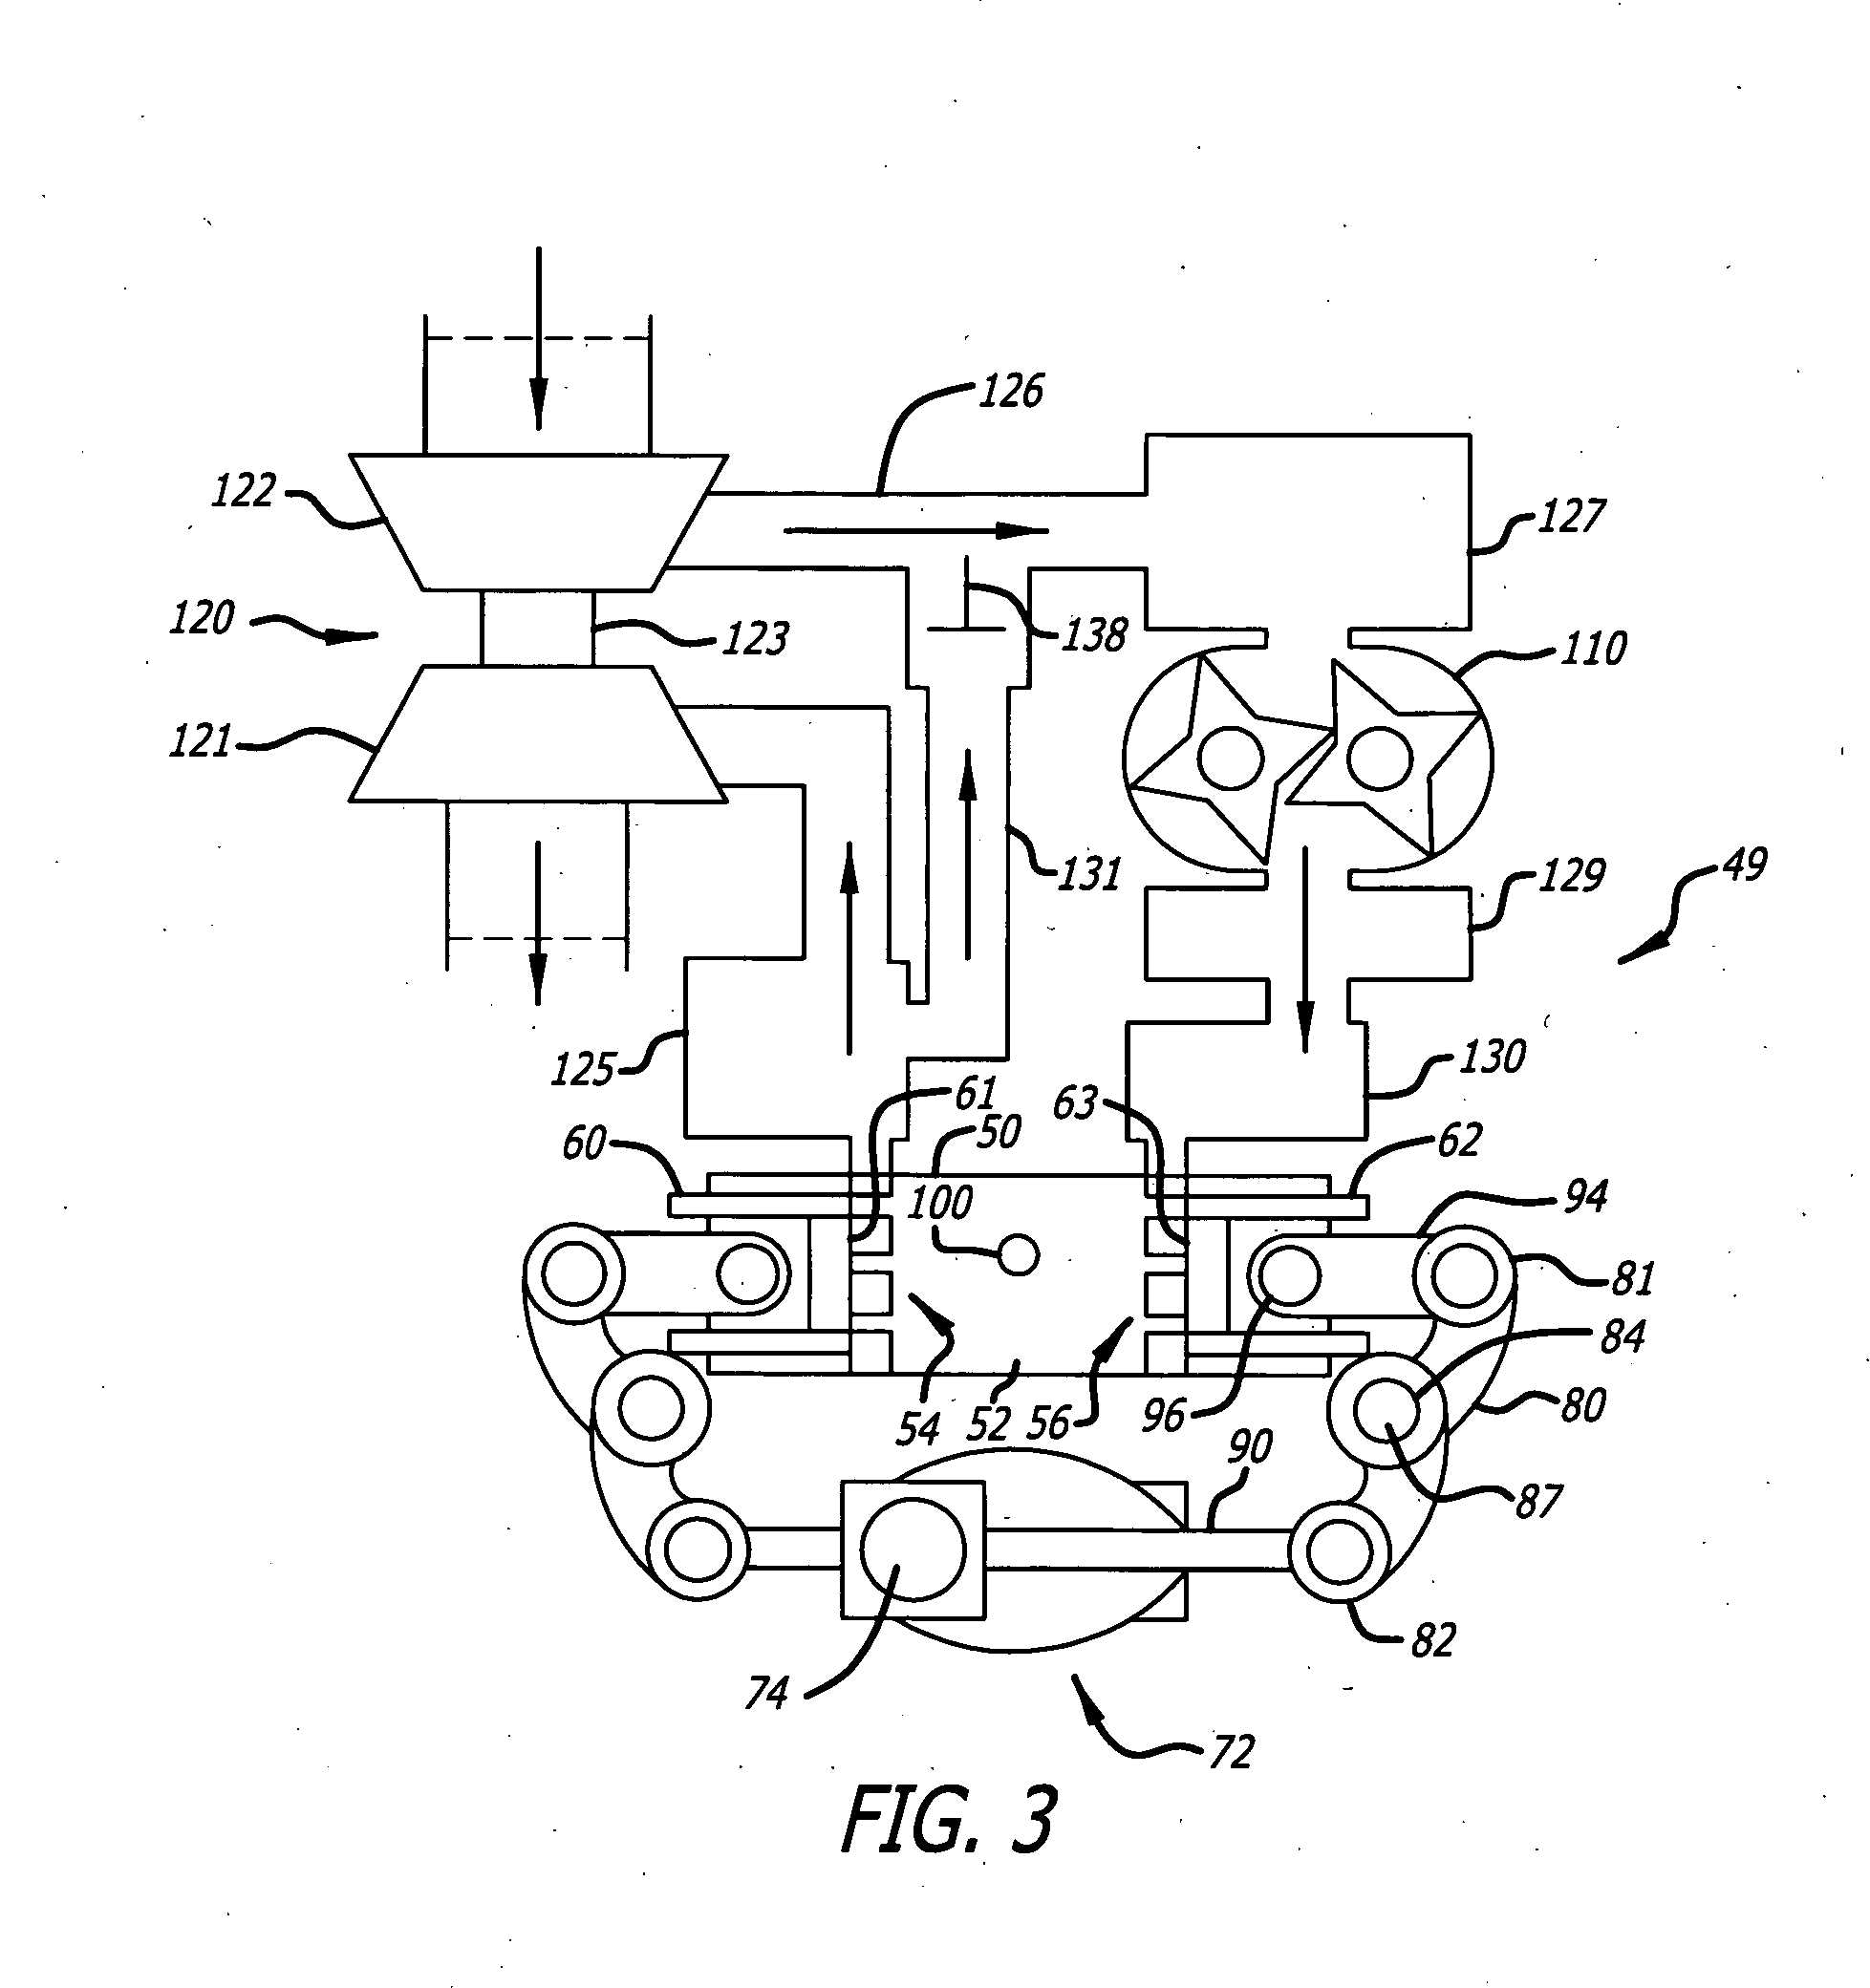 Opposed-piston engine having a single crankshaft coupled to the opposed pistons by linkages with pivoted rocker arms